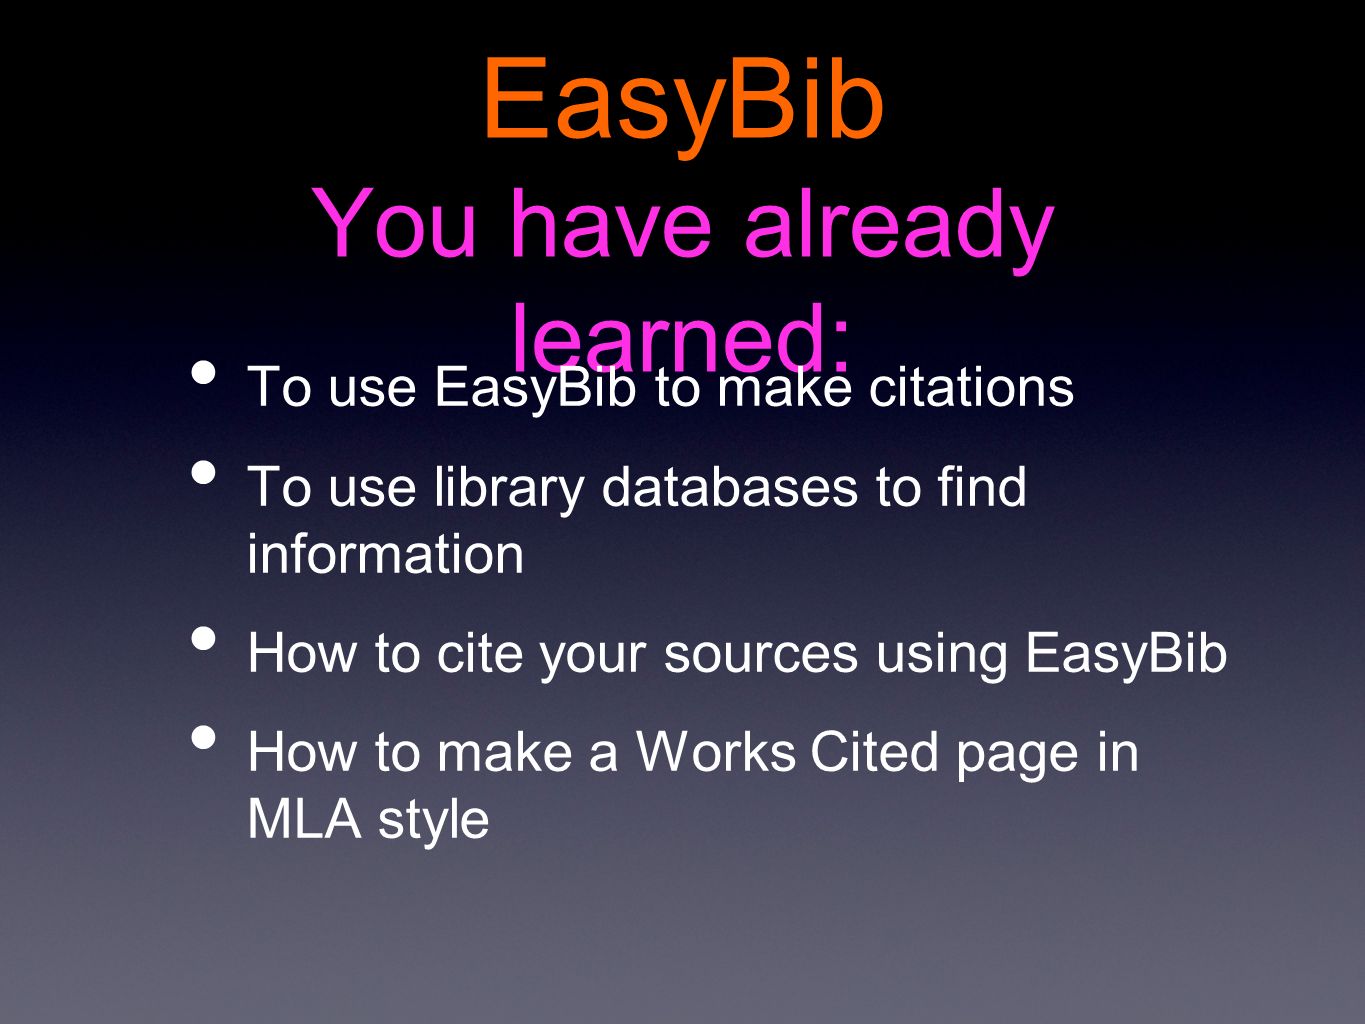 EasyBib You have already learned: To use EasyBib to make citations To use library databases to find information How to cite your sources using EasyBib How to make a Works Cited page in MLA style